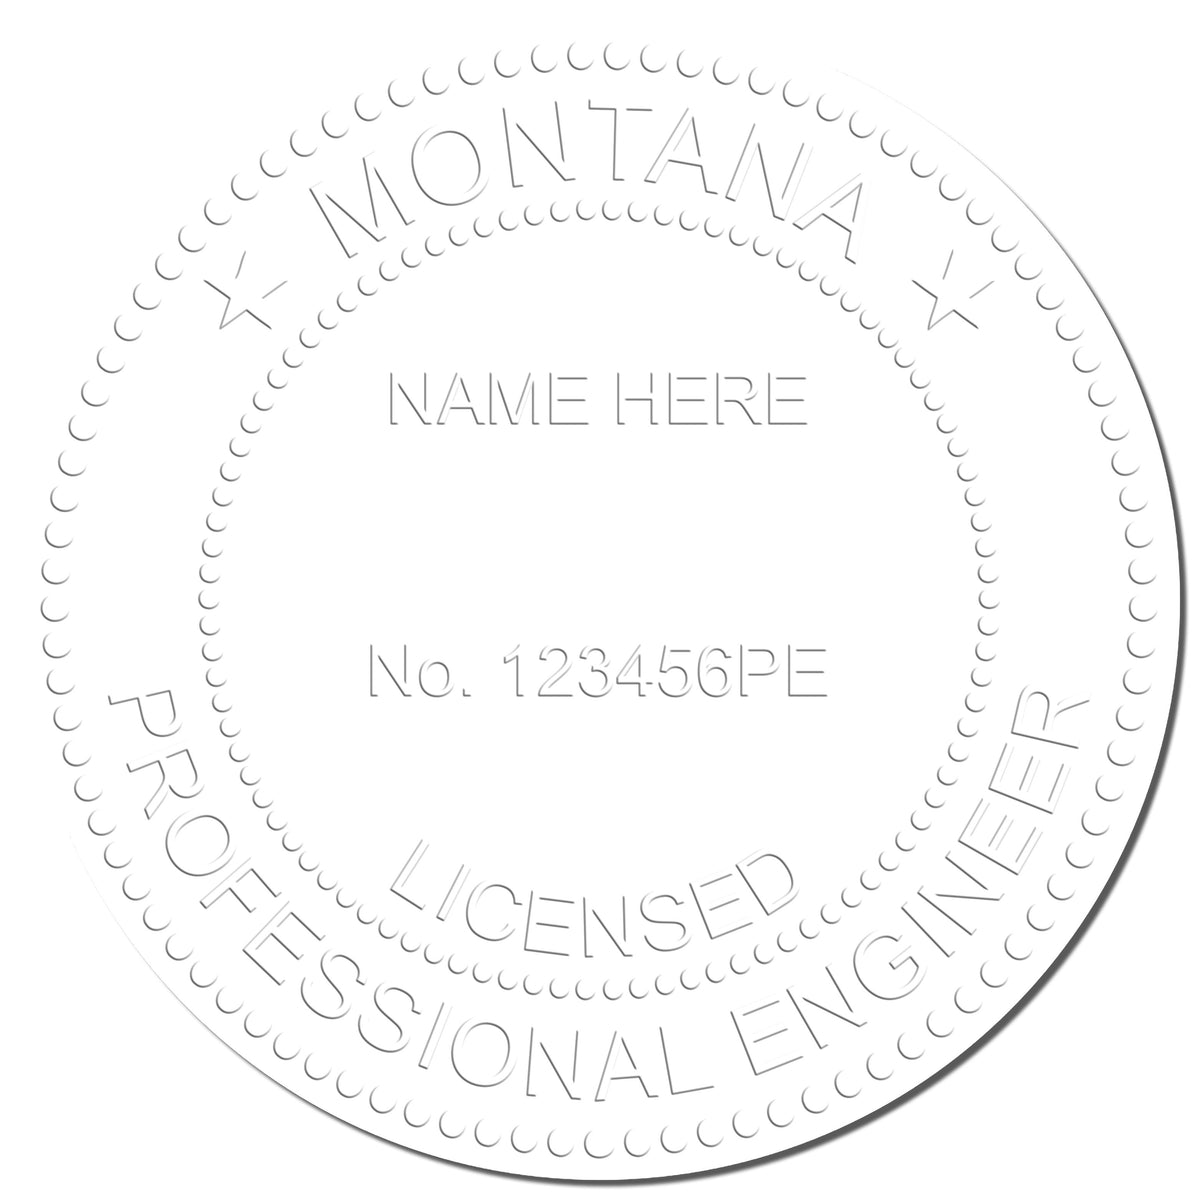 This paper is stamped with a sample imprint of the Gift Montana Engineer Seal, signifying its quality and reliability.